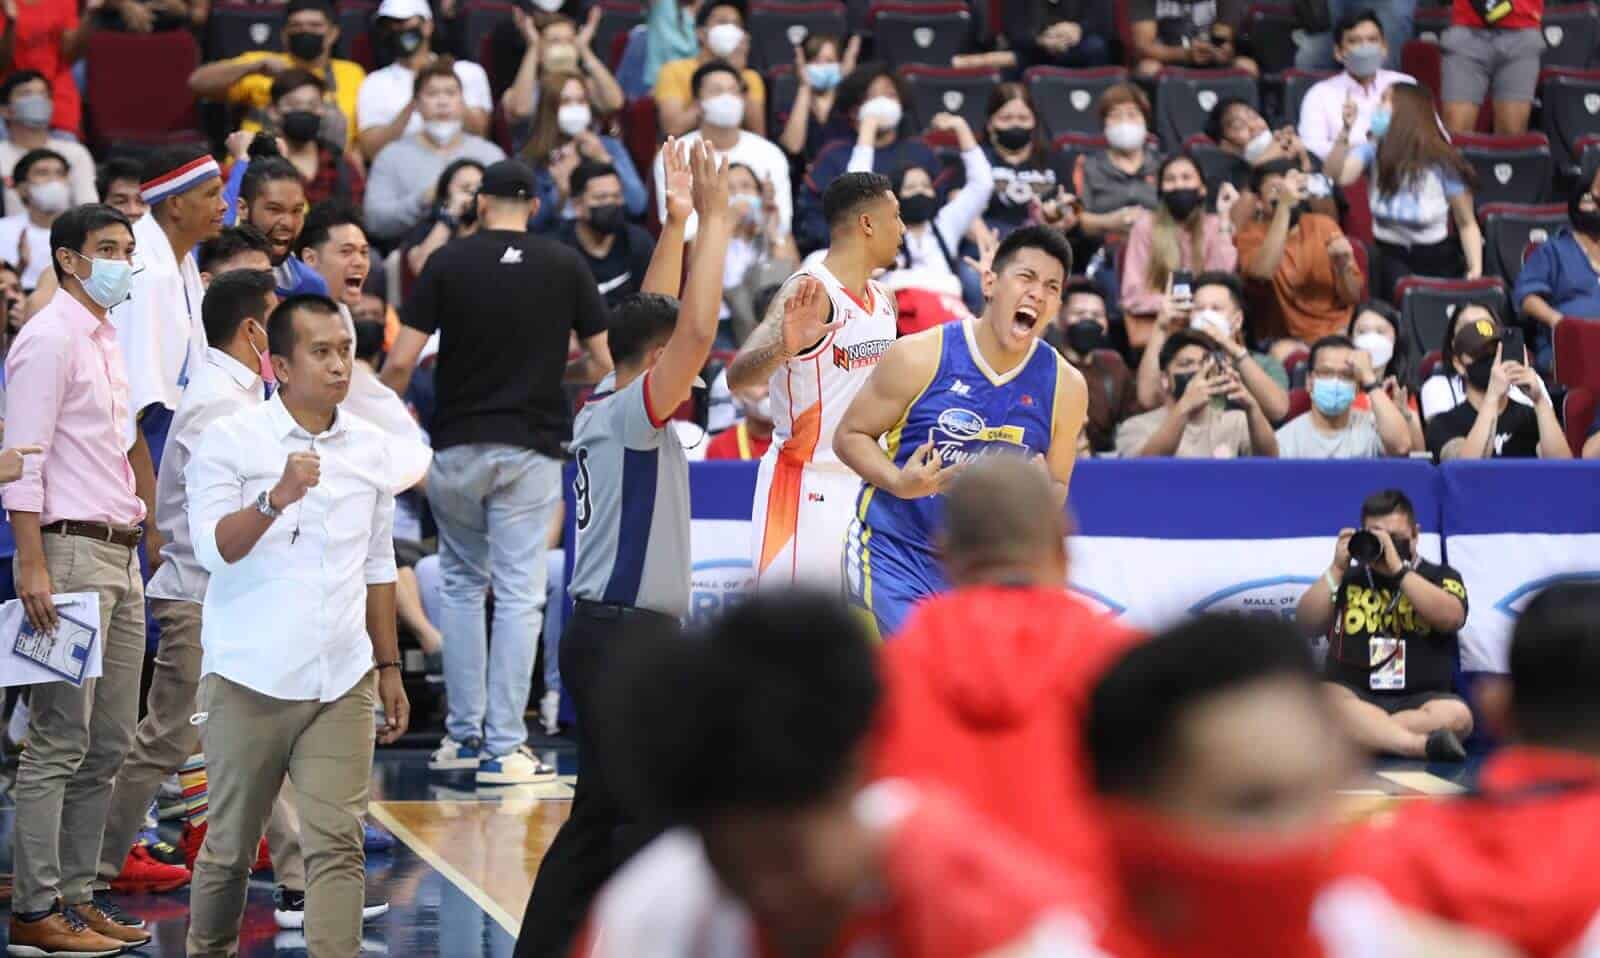 The Philippine national basketball team triumphs over their rival in a competitive game.